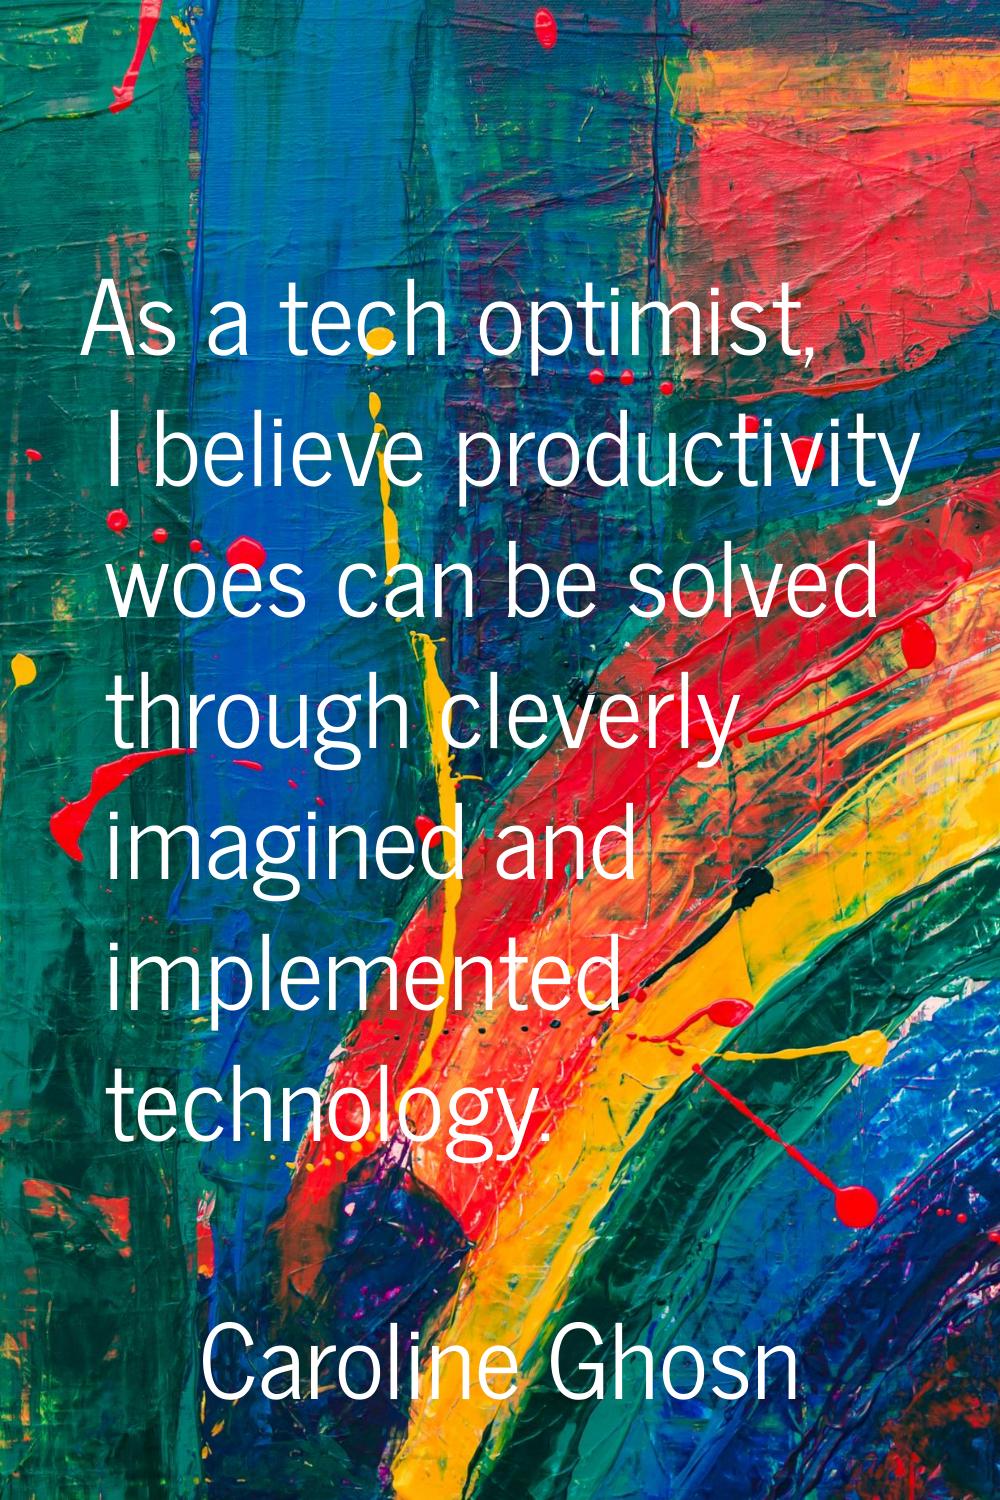 As a tech optimist, I believe productivity woes can be solved through cleverly imagined and impleme